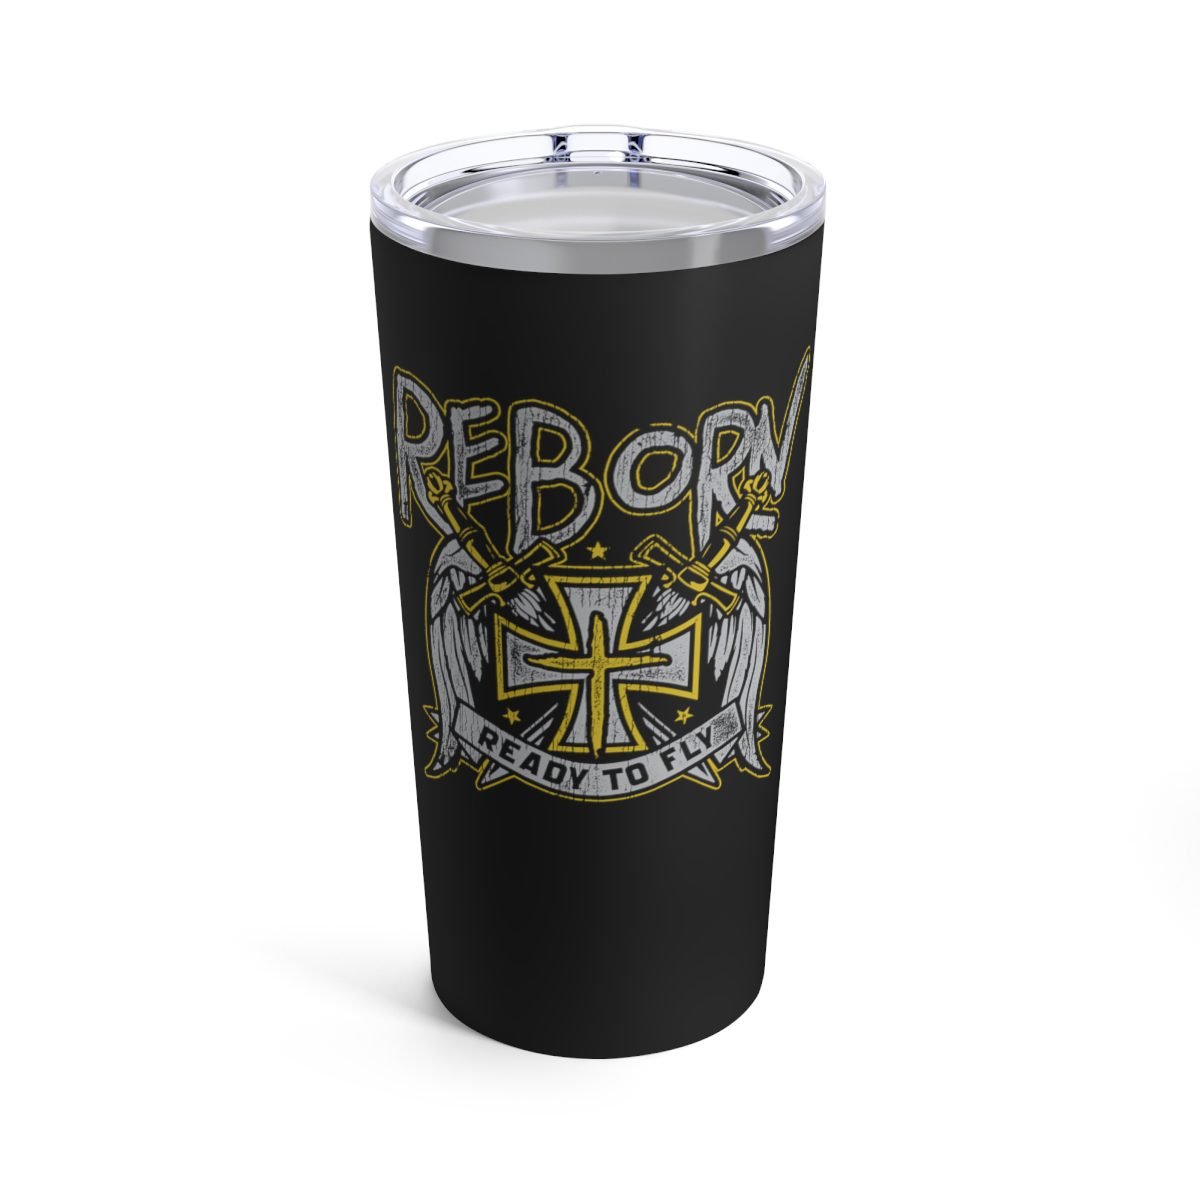 Reborn – Ready to Fly 20oz Stainless Steel Tumbler